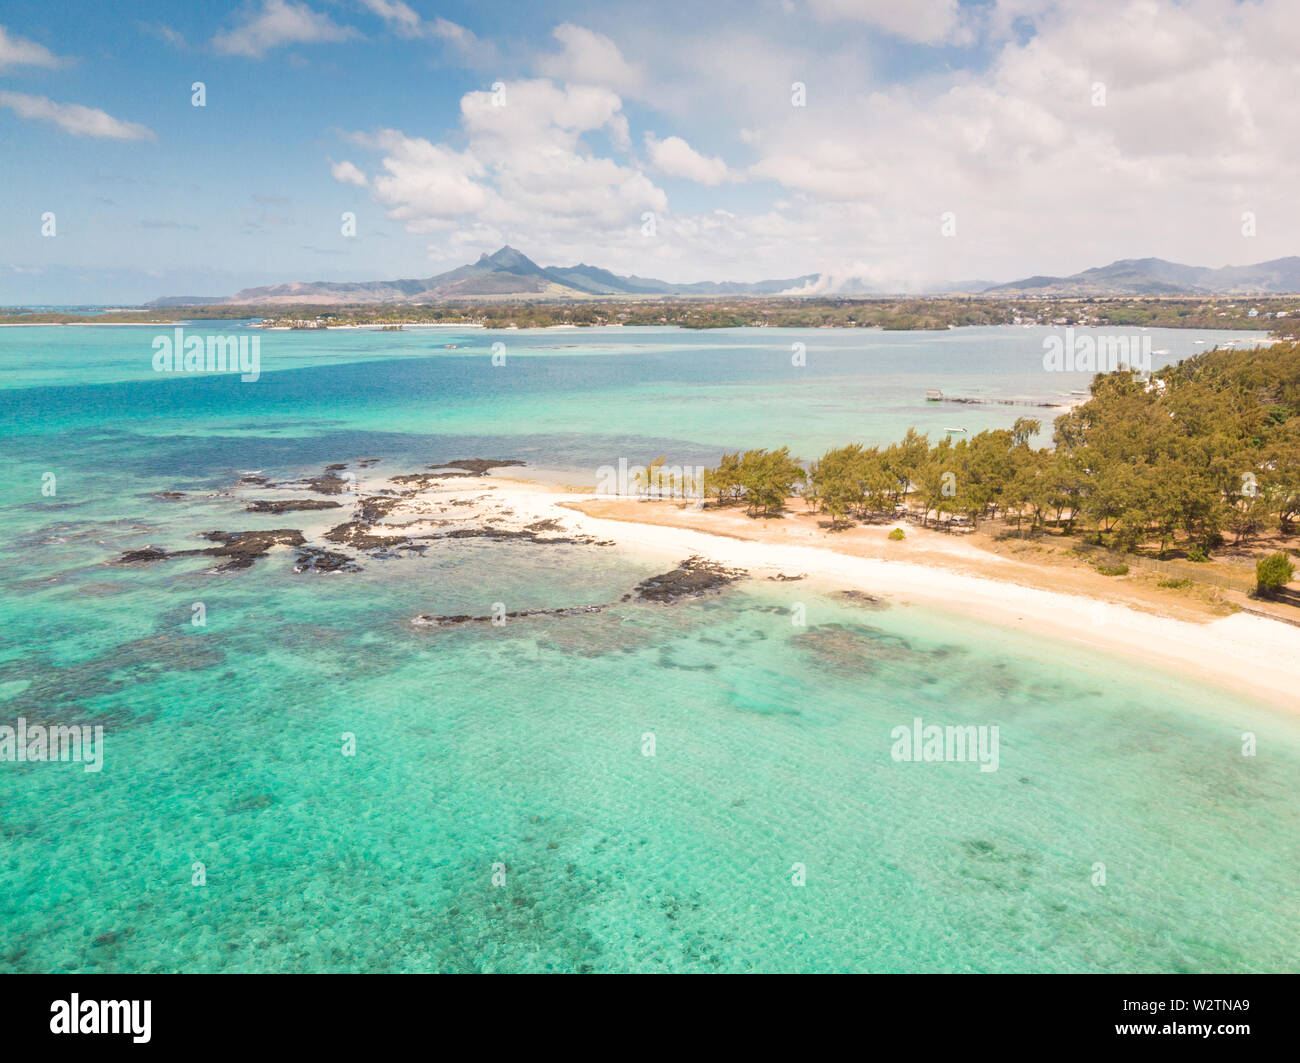 Aerial view of beautiful tropical beach with turquoise sea. Tropical vacation paradise destination of D'eau Douce and Ile aux Cerfs Mauritius Stock Photo